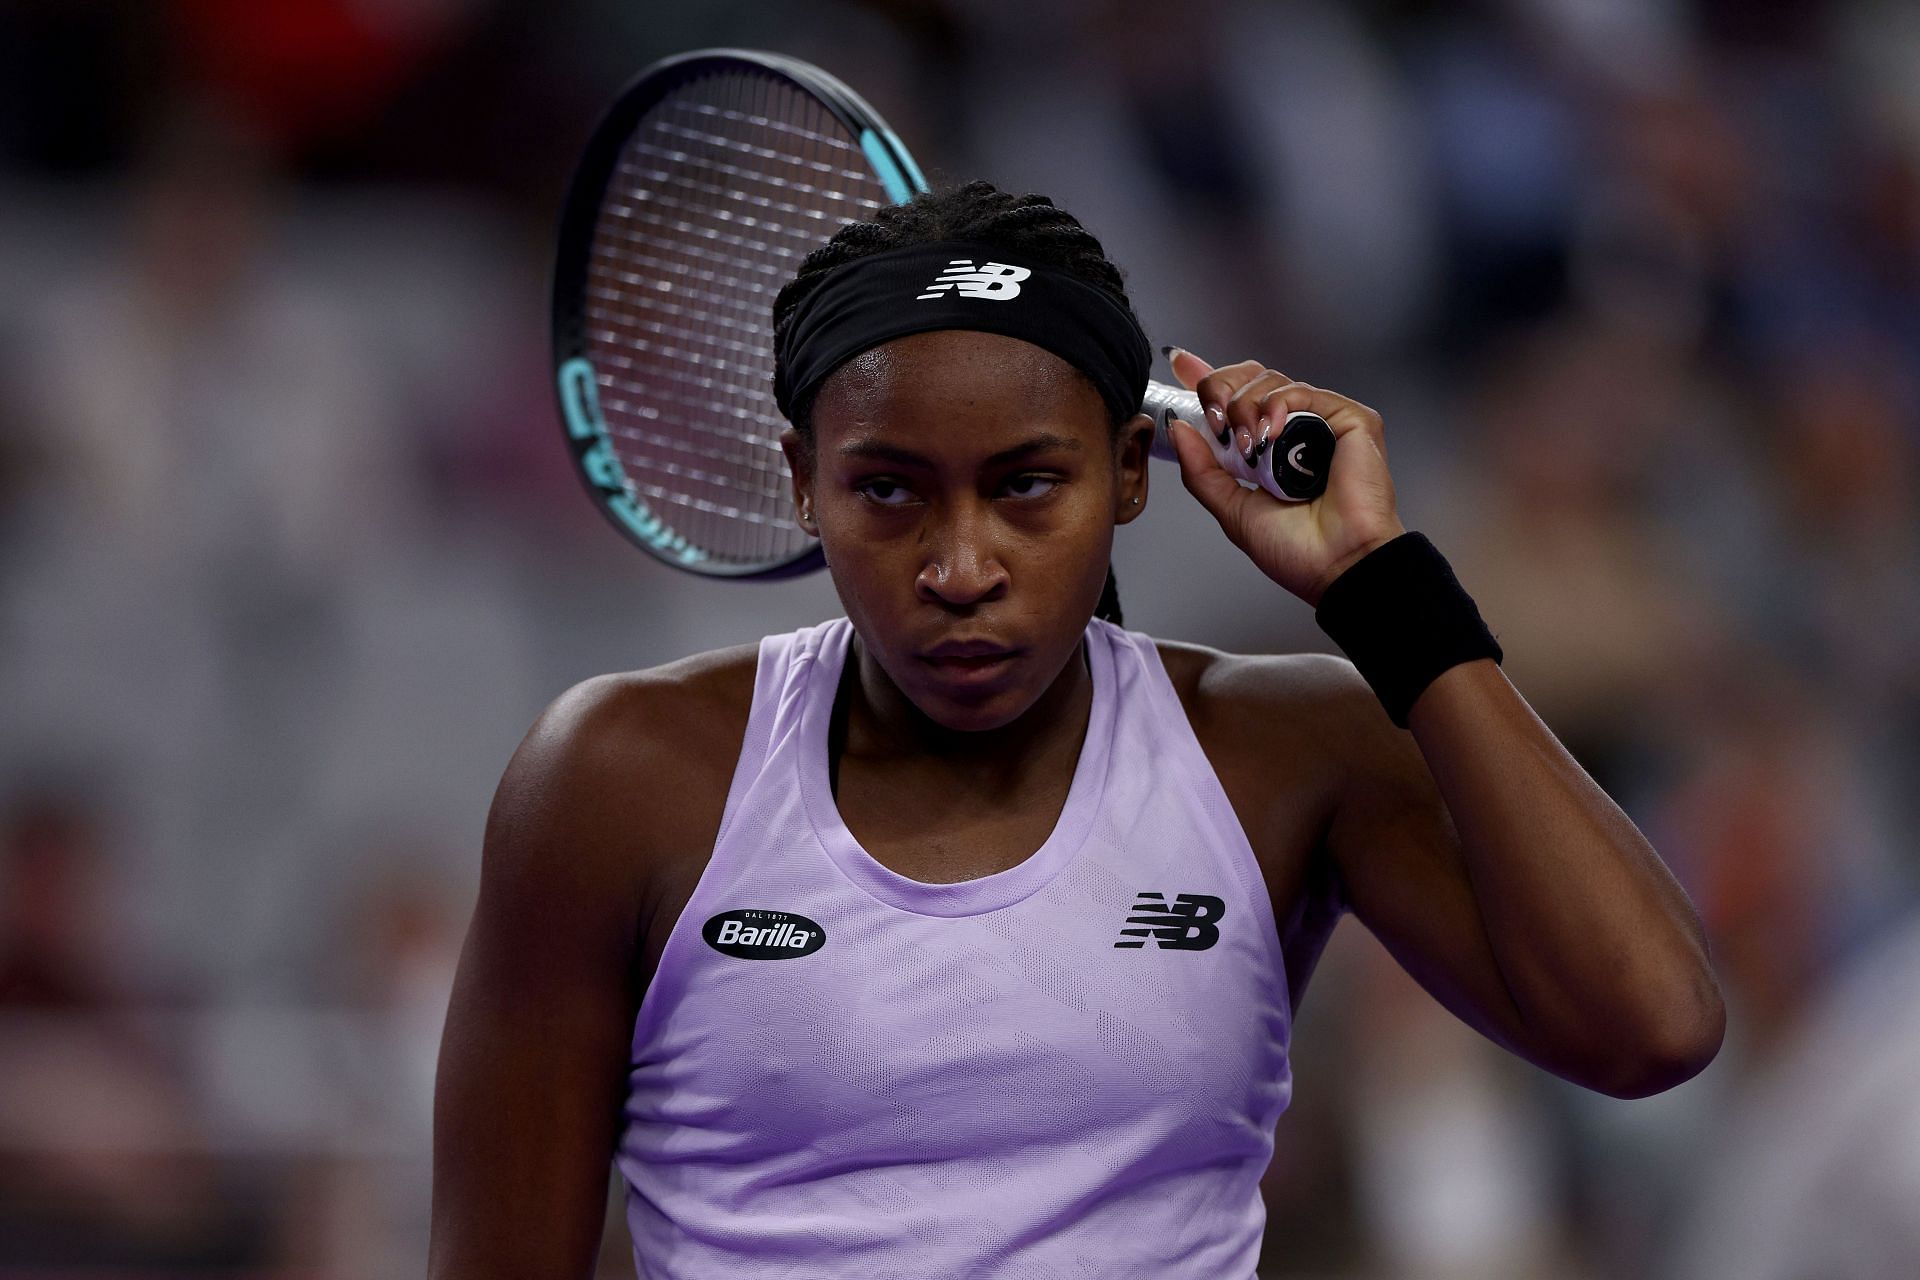 Coco Gauff pictured at the 2022 WTA Finals.